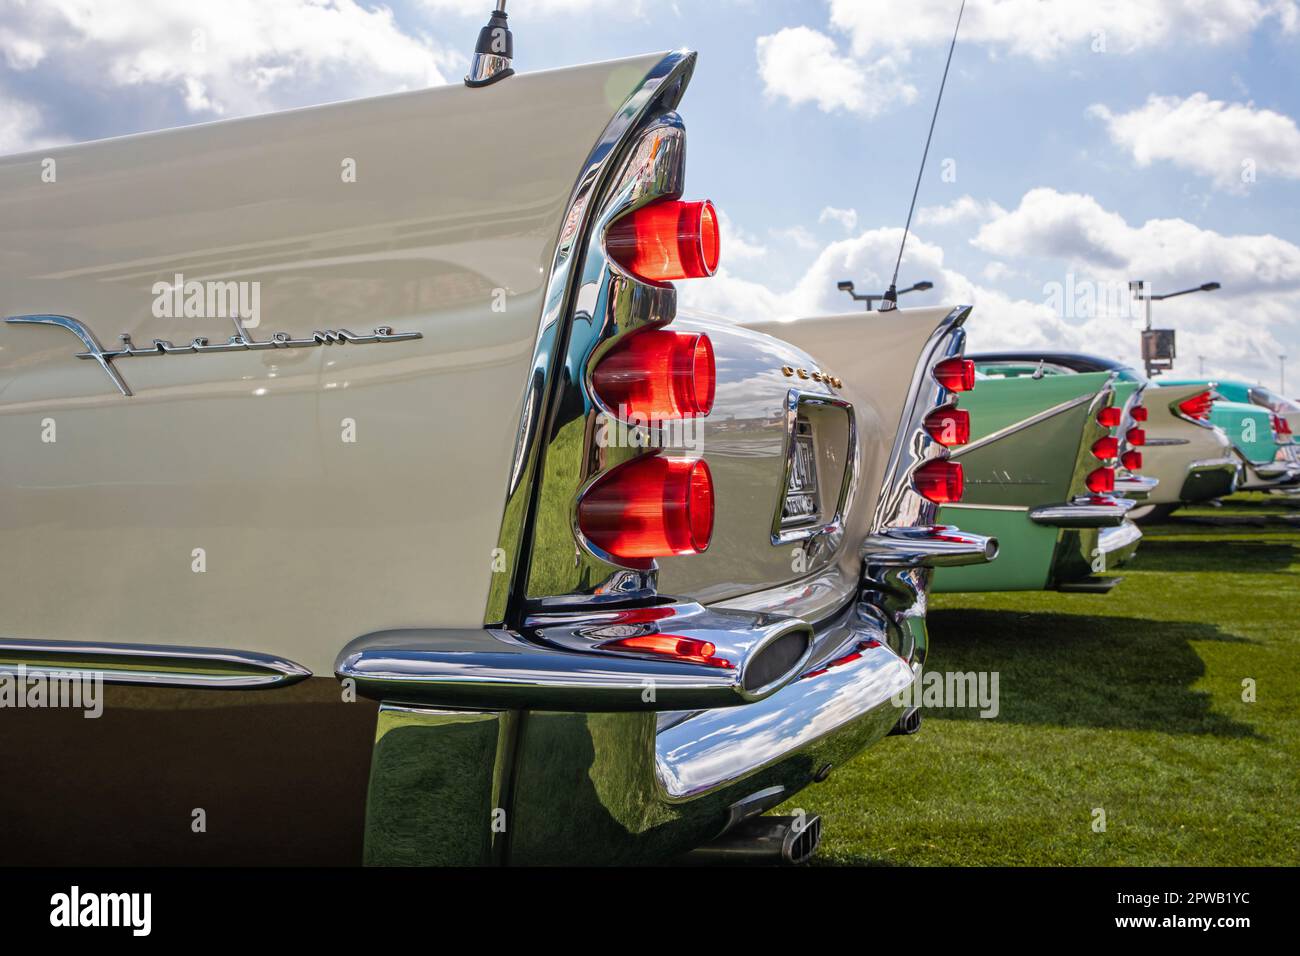 A row of classic DeSoto automobile tail fins from 1957, 1958, 1960 and 1955 on display at a classic car show. Stock Photo